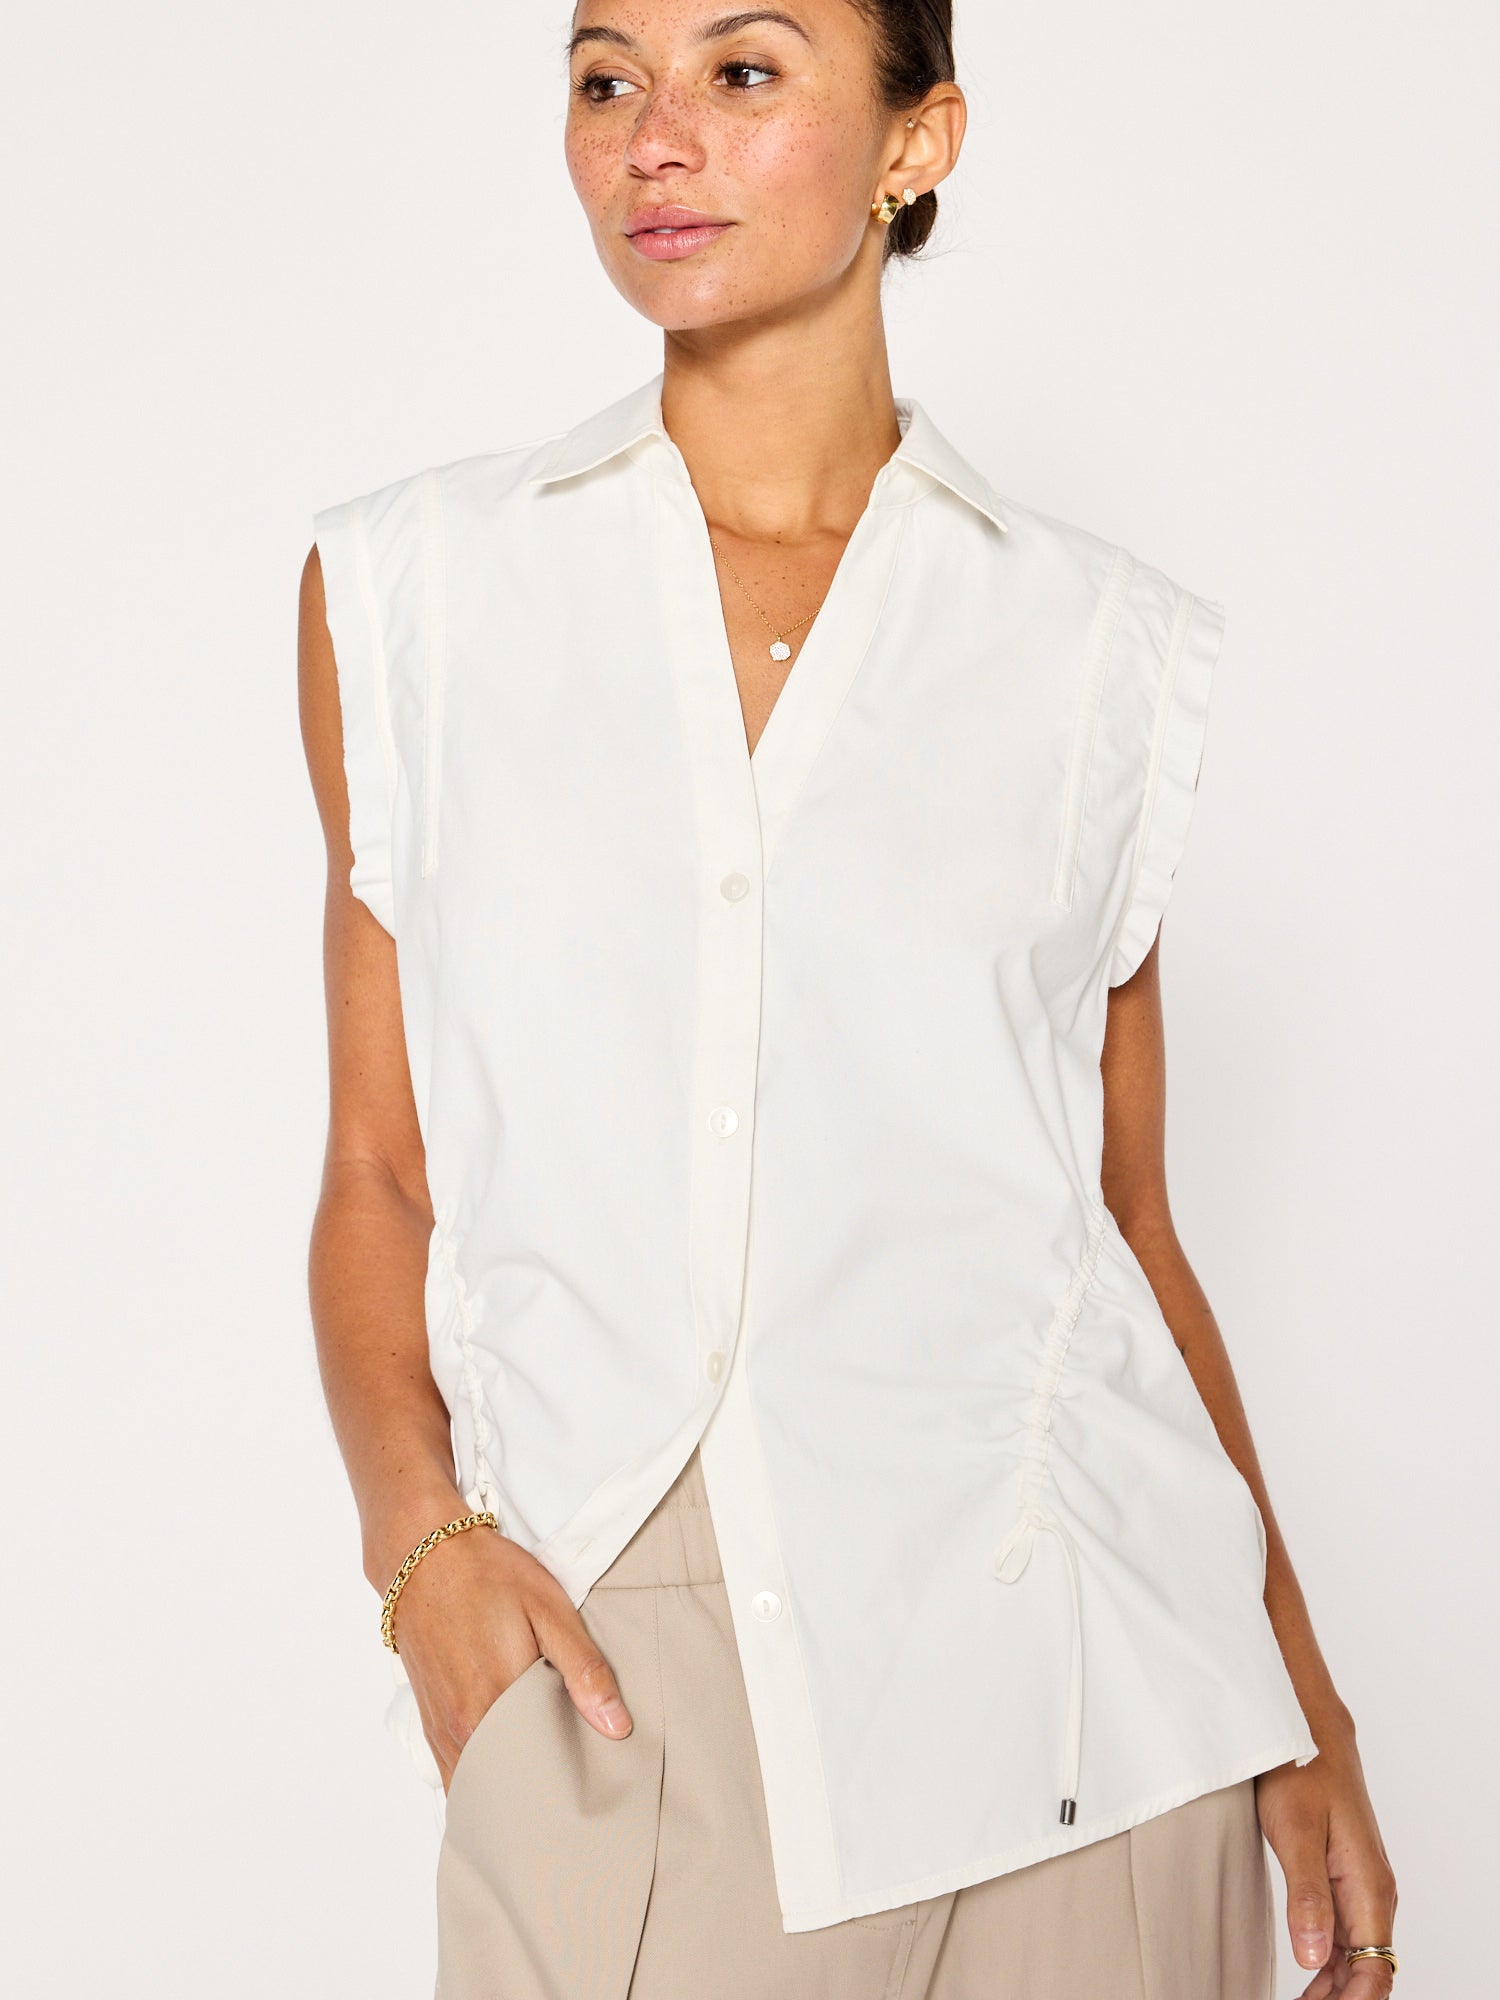 Marcie white sleeveless button up top front view